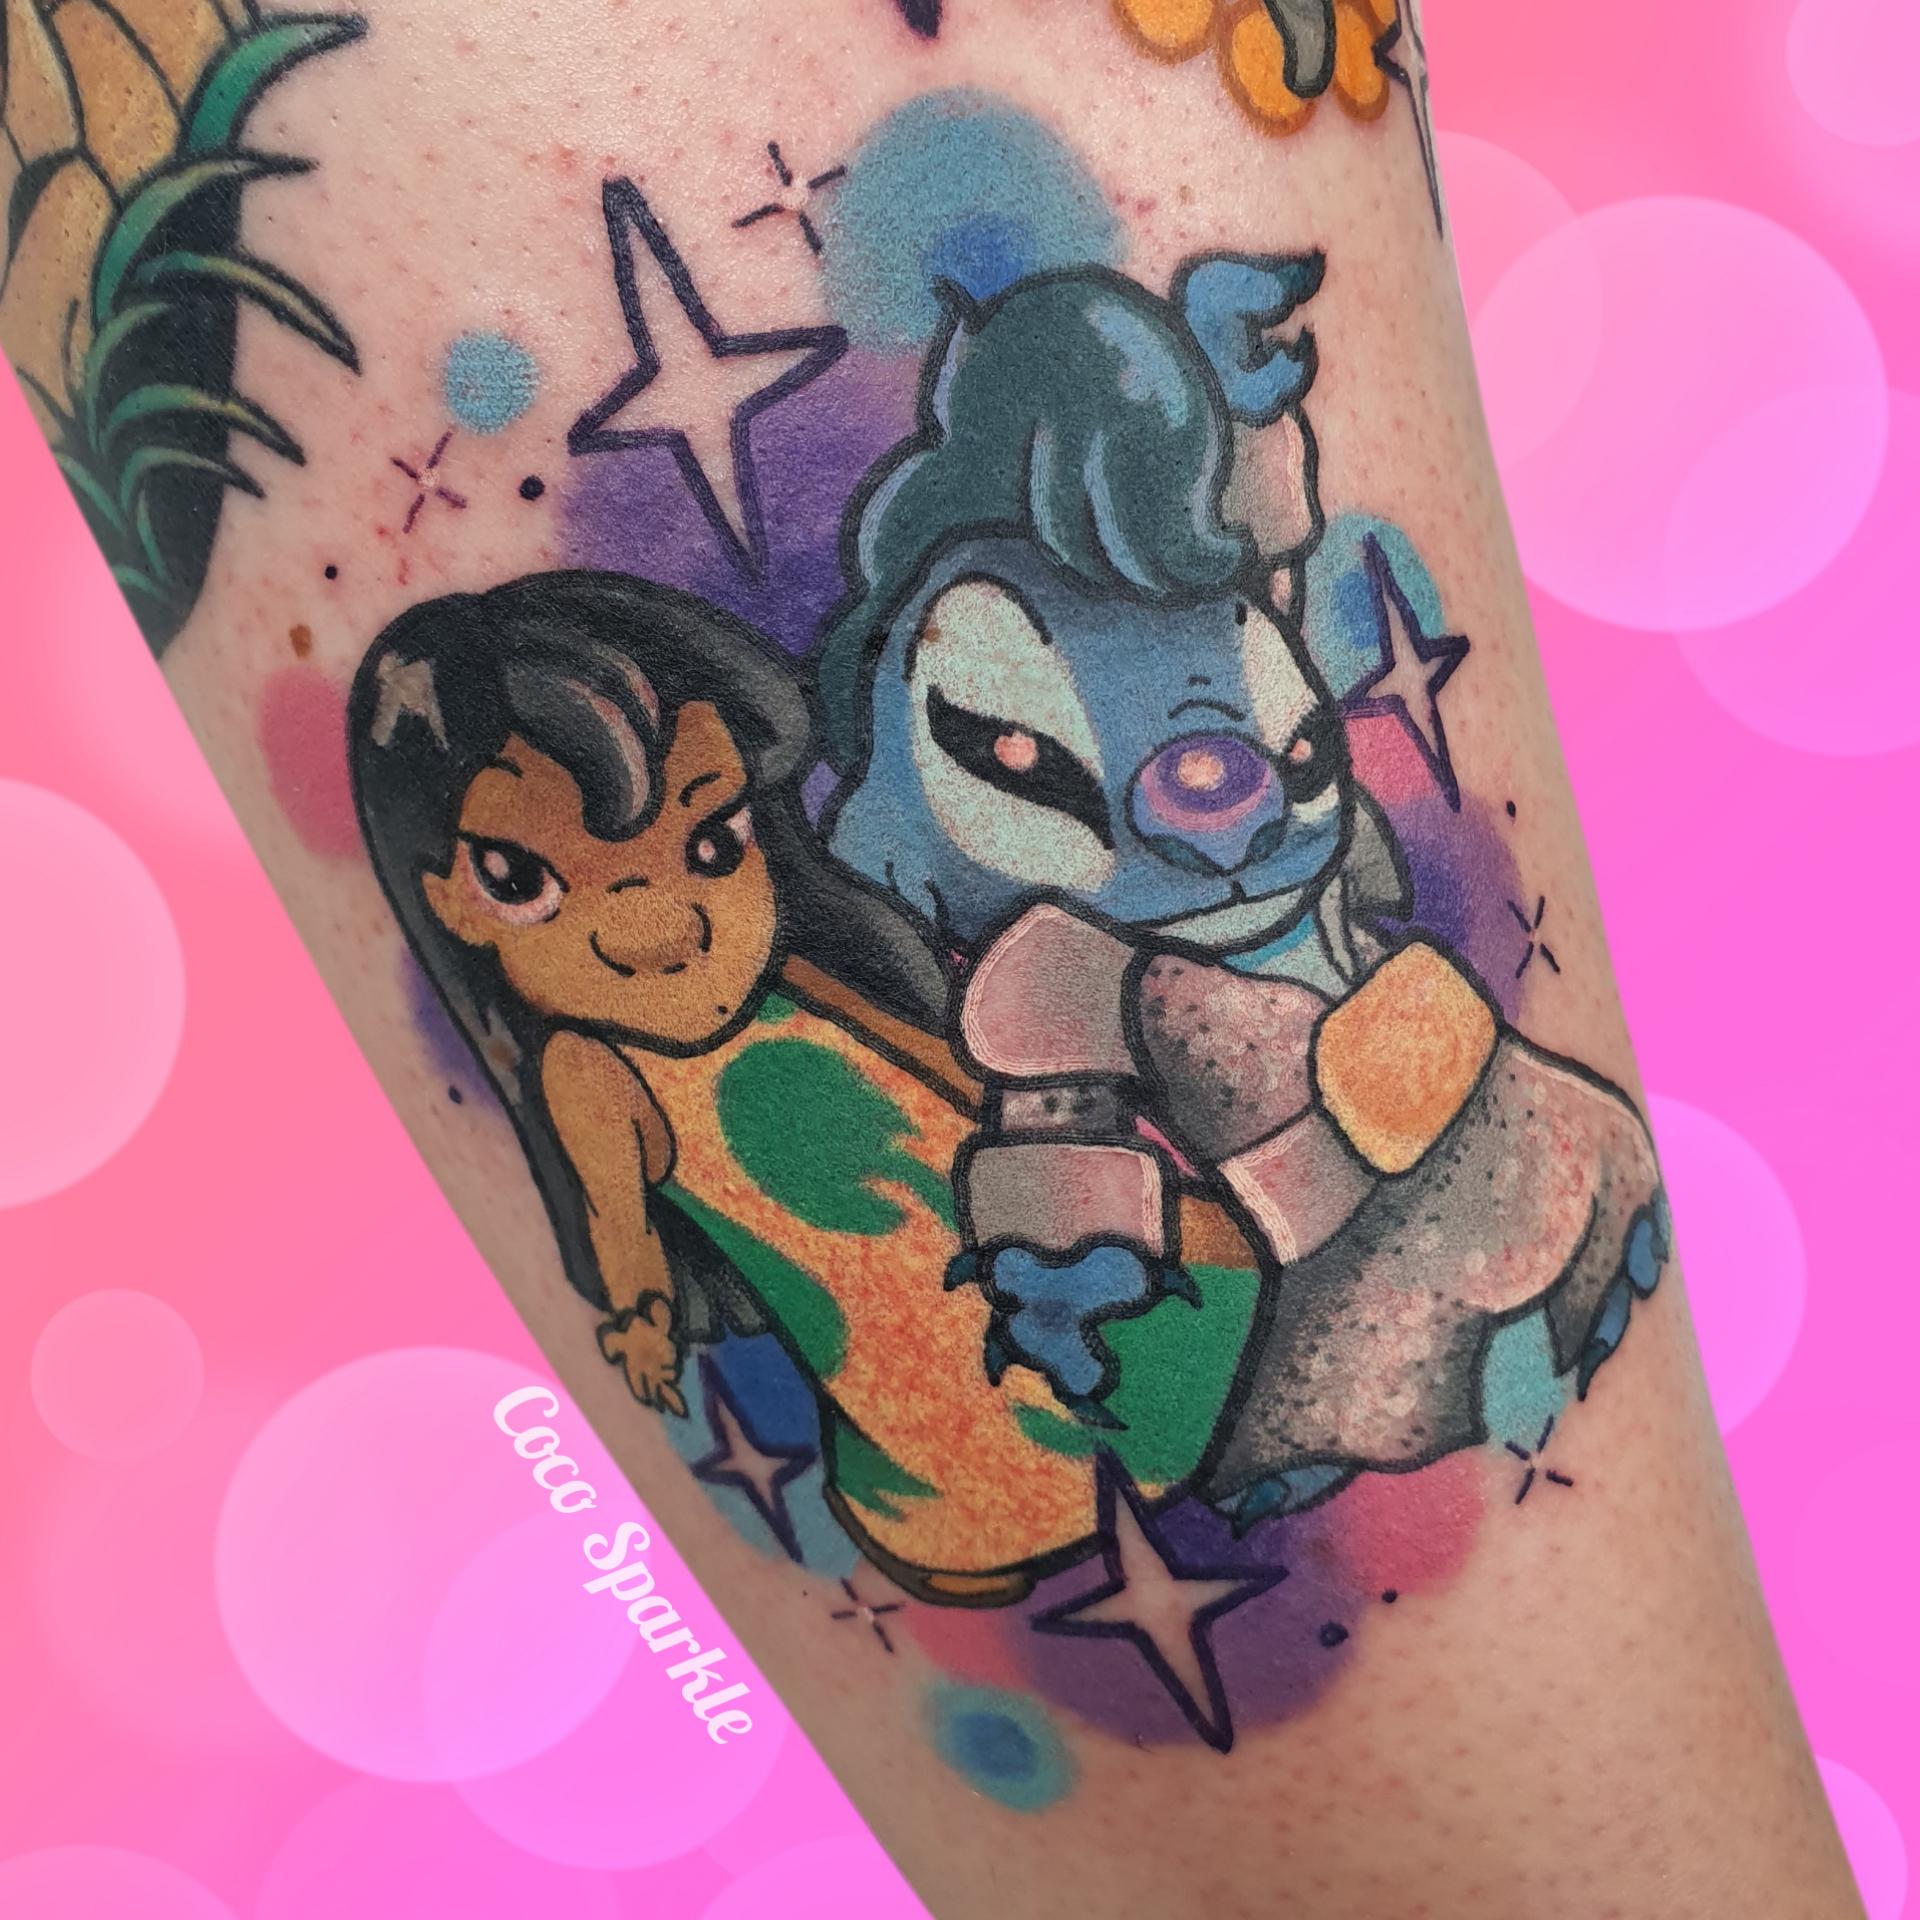 Inksearch tattoo Coco